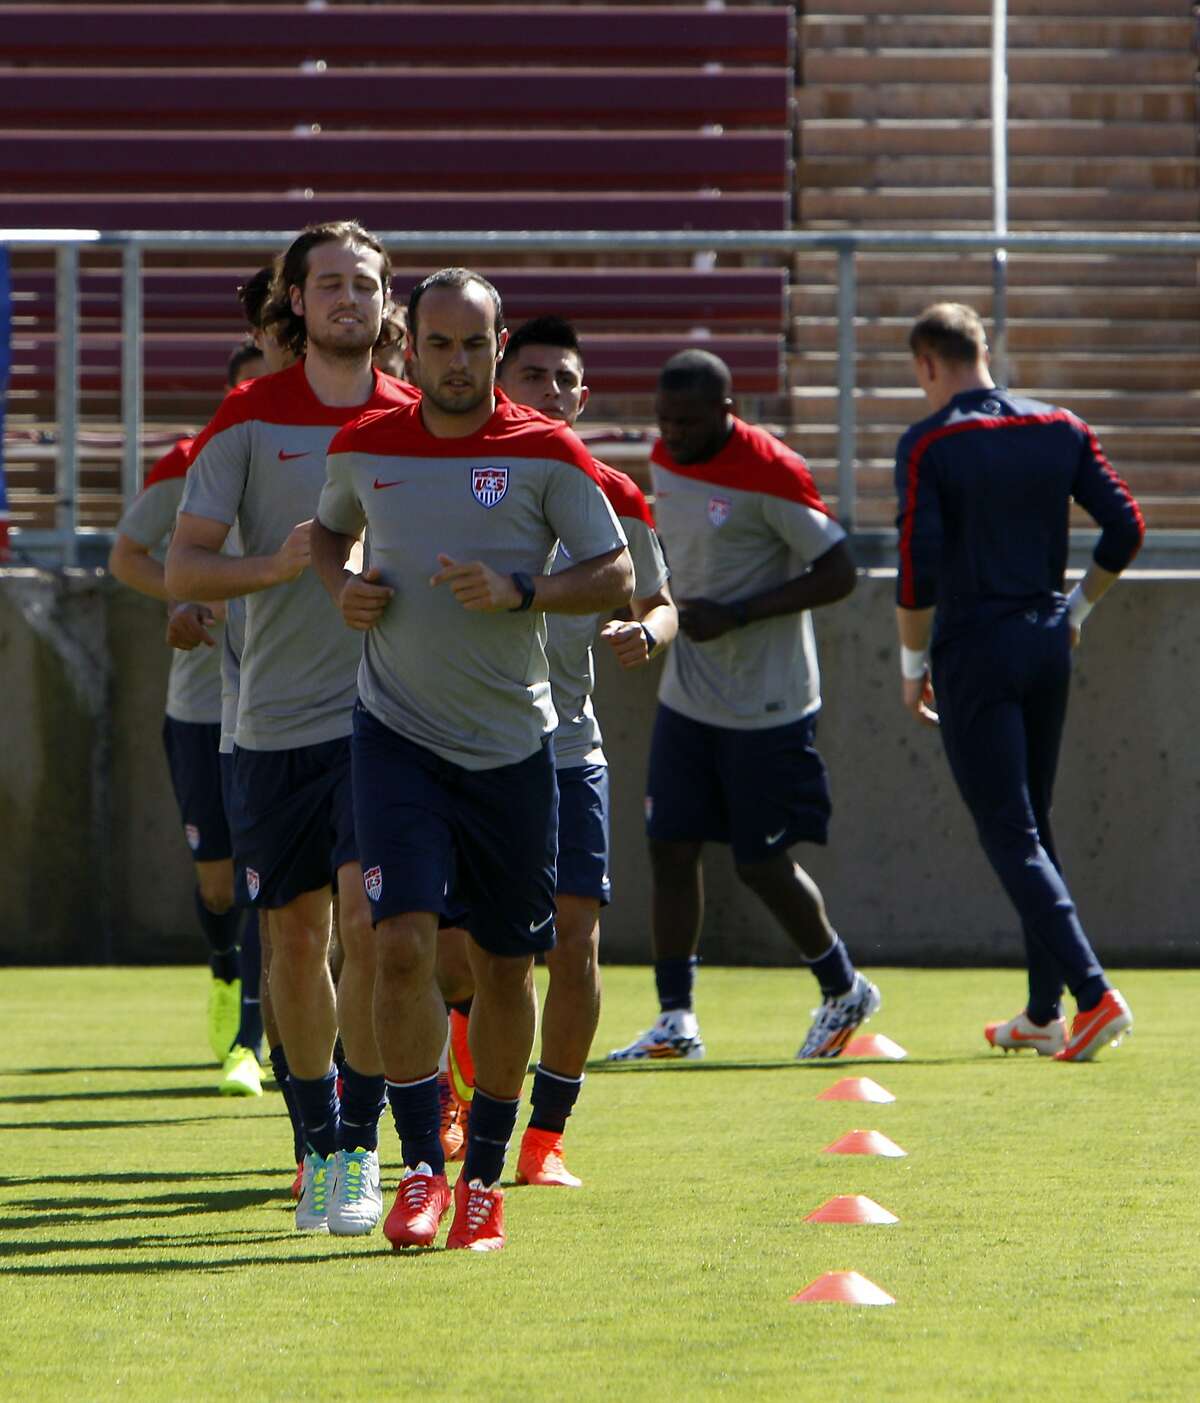 Landon Donovan leads members of the US Men's National Soccer team in drills at Stanford Stadium on Wednesday. The team was introduced during an exhibition practice at Stanford University in Stanford, Calif., on Wednesday, May 14, 2014.